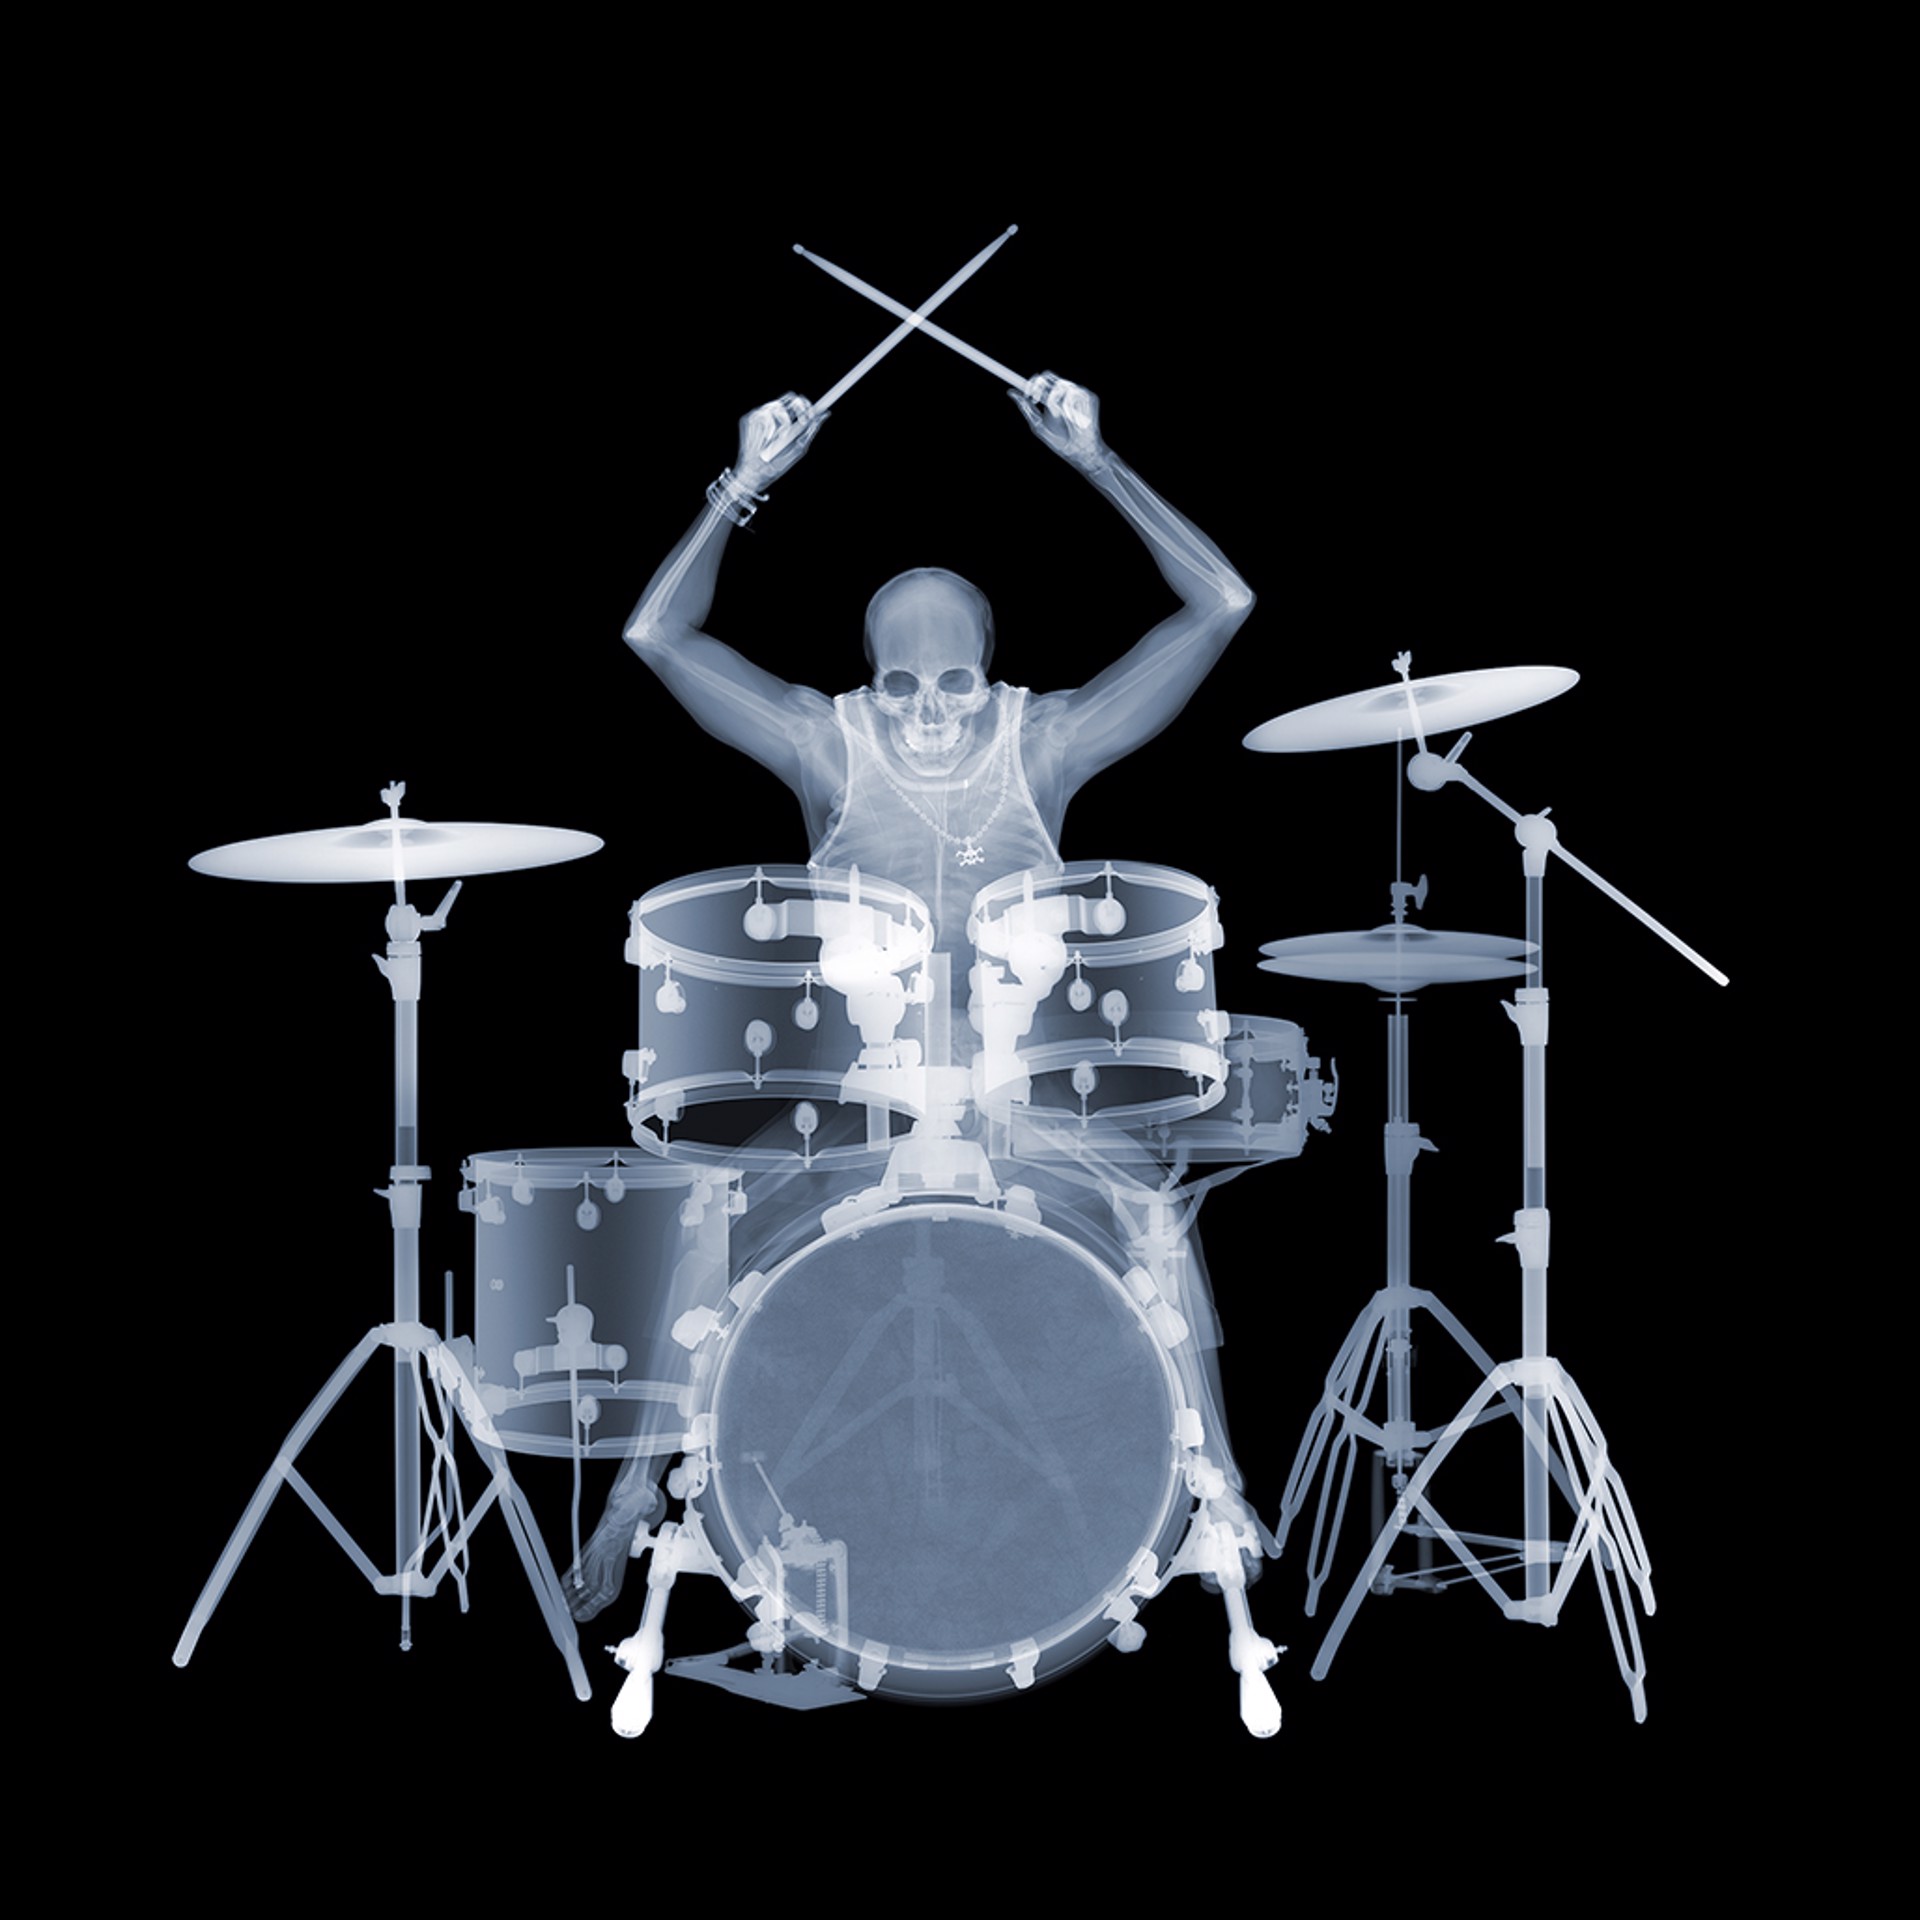 Drummin' by Nick Veasey